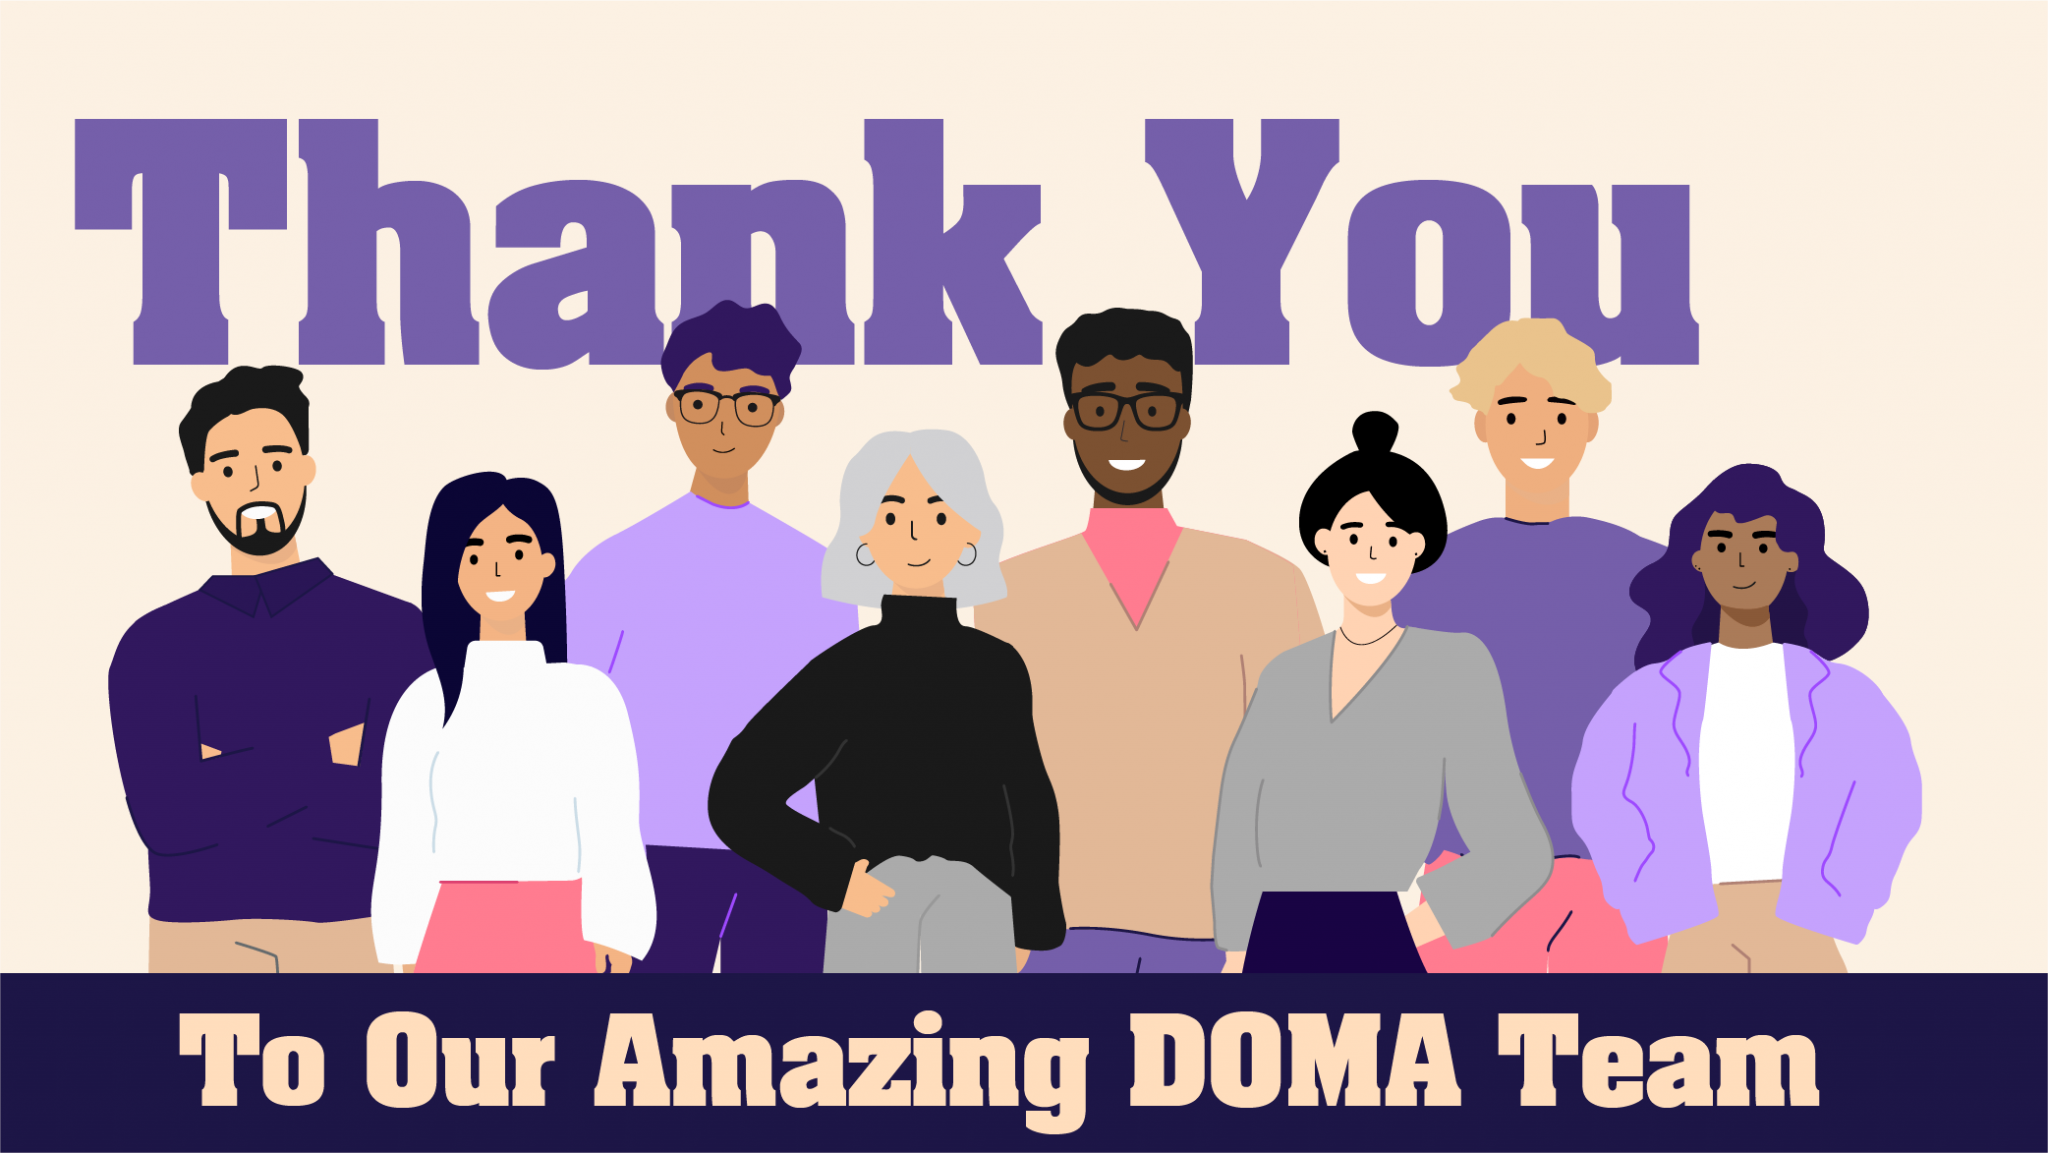 Thank you to our amazing DOMA team